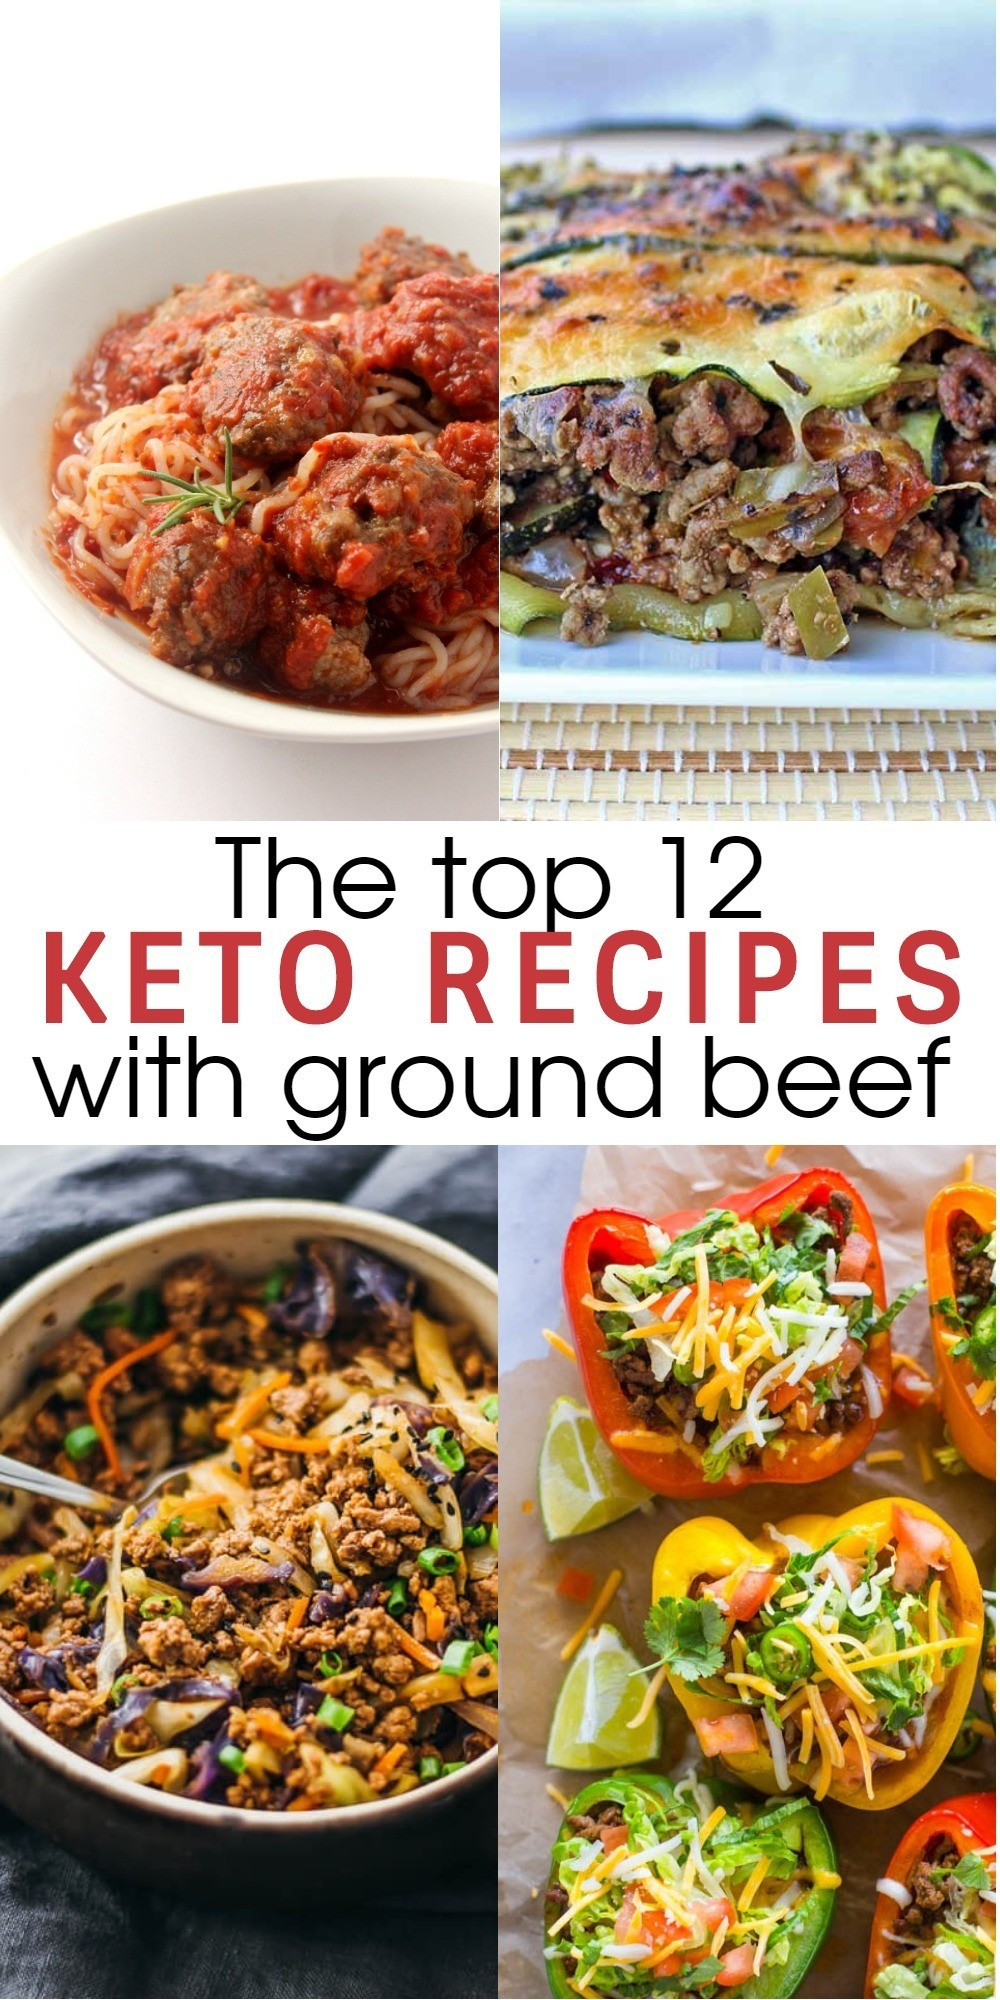 Easy Keto Recipes 3 Ingredients Dinner
 12 Flavorful and Easy Keto Recipes With Ground Beef To Try